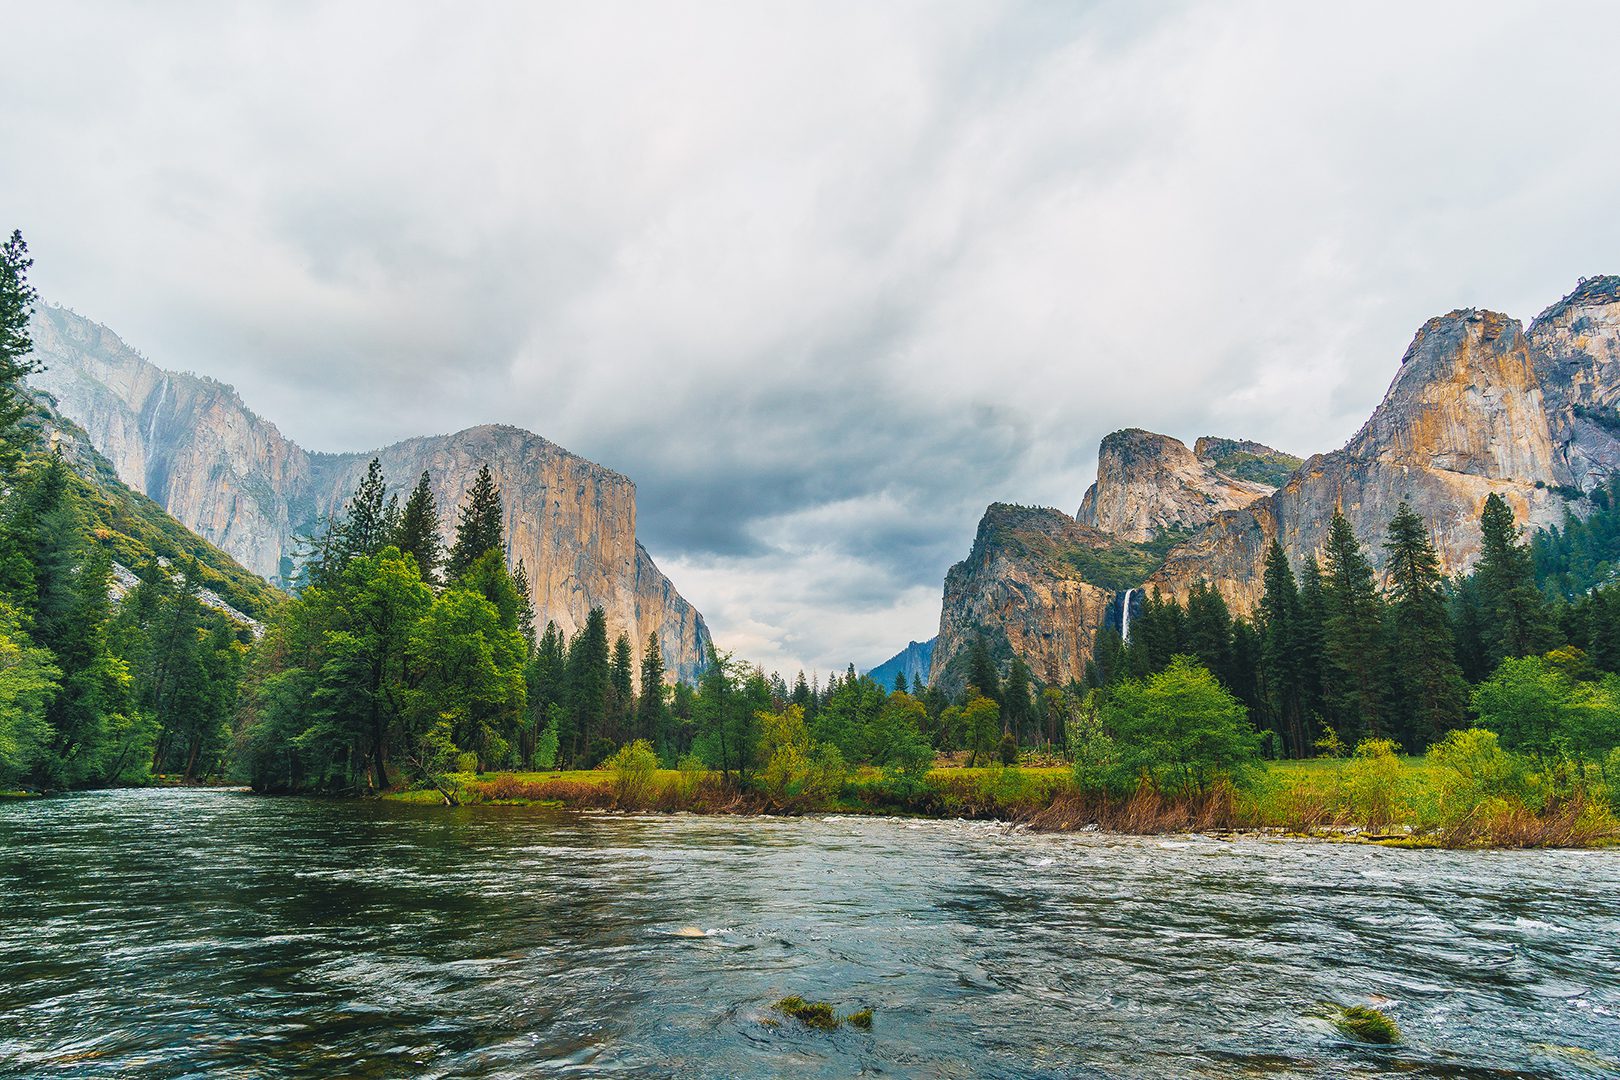 Views of Yosemite Valley on a group camping adventure with Green Tortoise